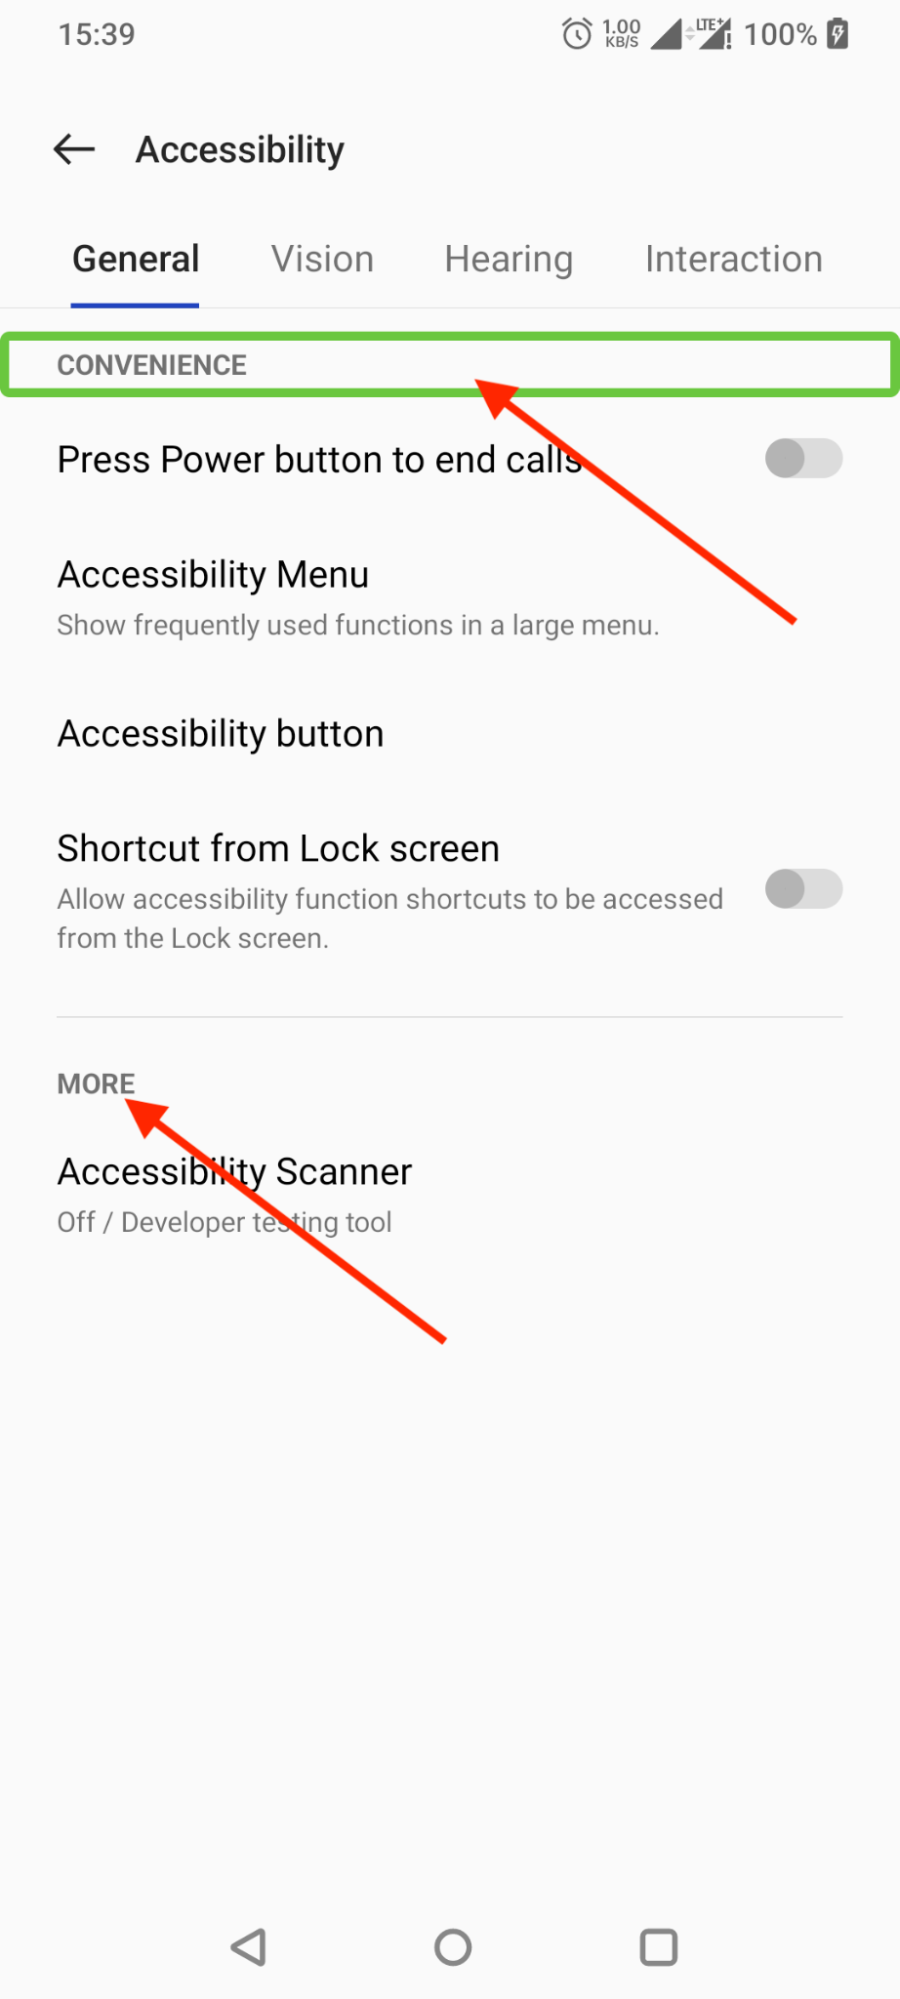 How to provide accessibility in Android application - step by step guide